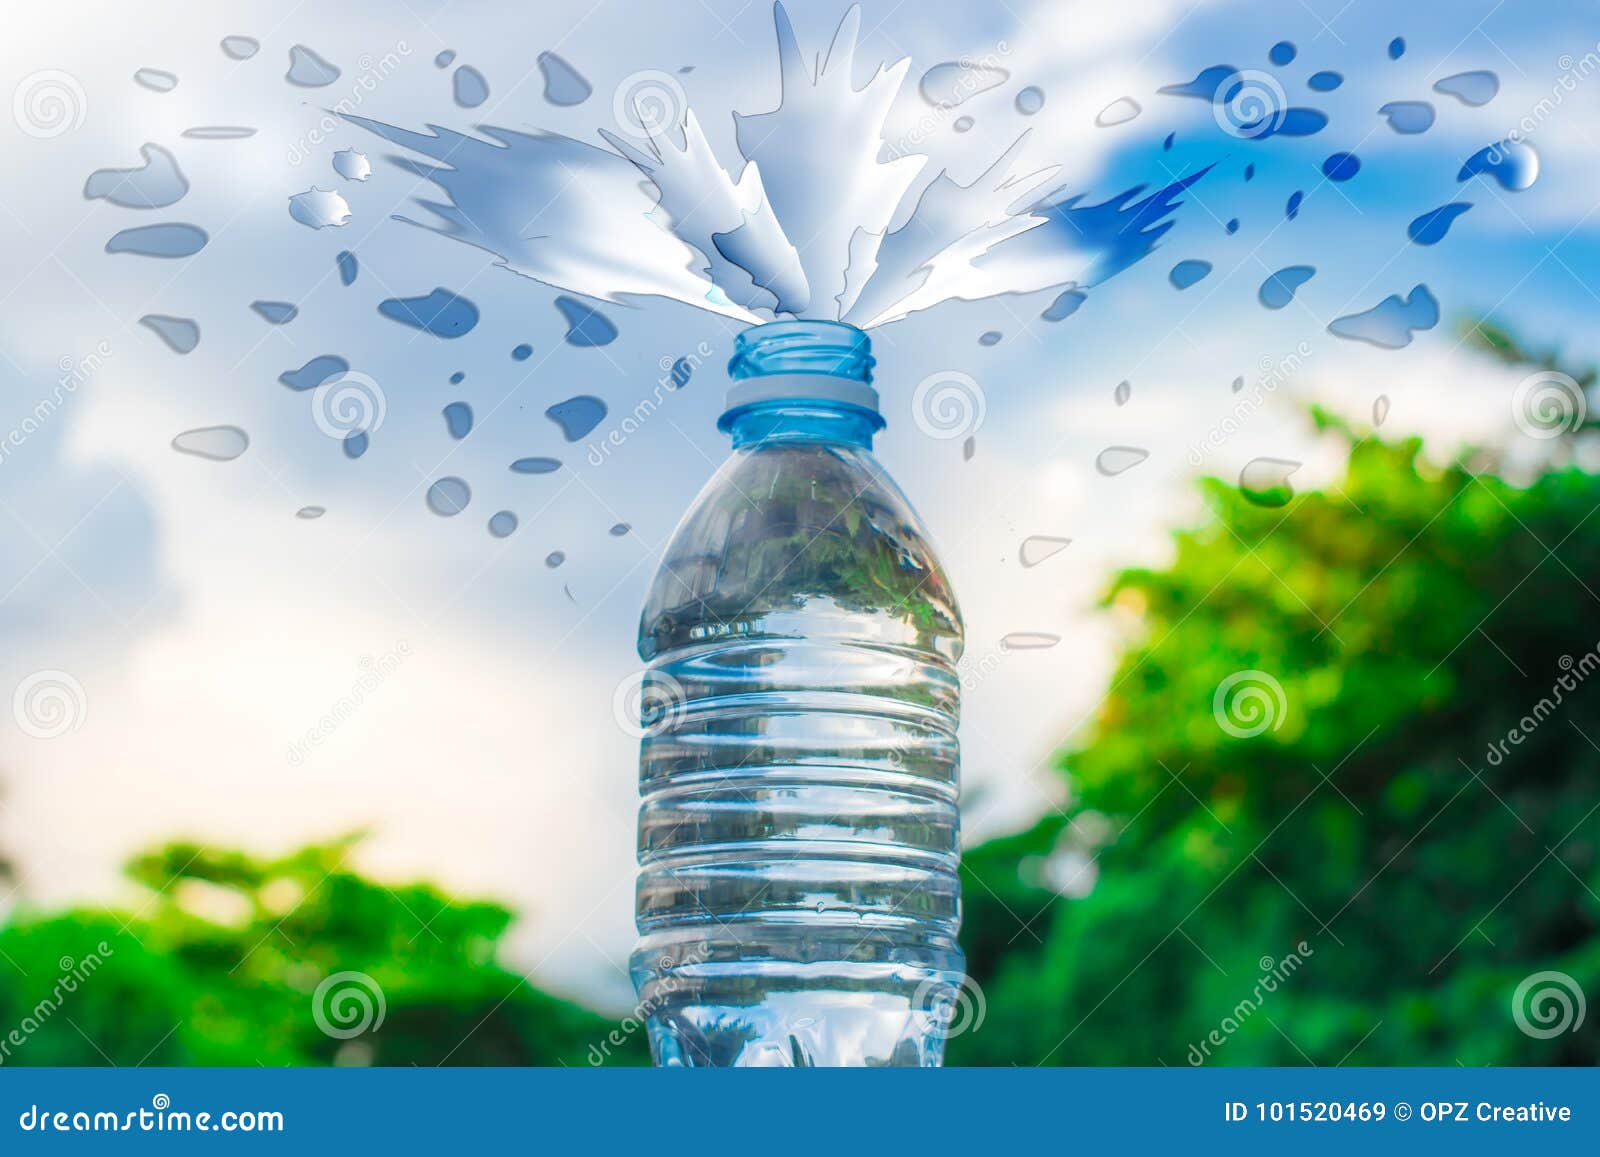 Bottle Water Made To Plastic on Sky and Tree Blurry   Wallpaper for Package or Product, Refreshing Image and Copy S Stock Image -  Image of liquid, hand: 101520469